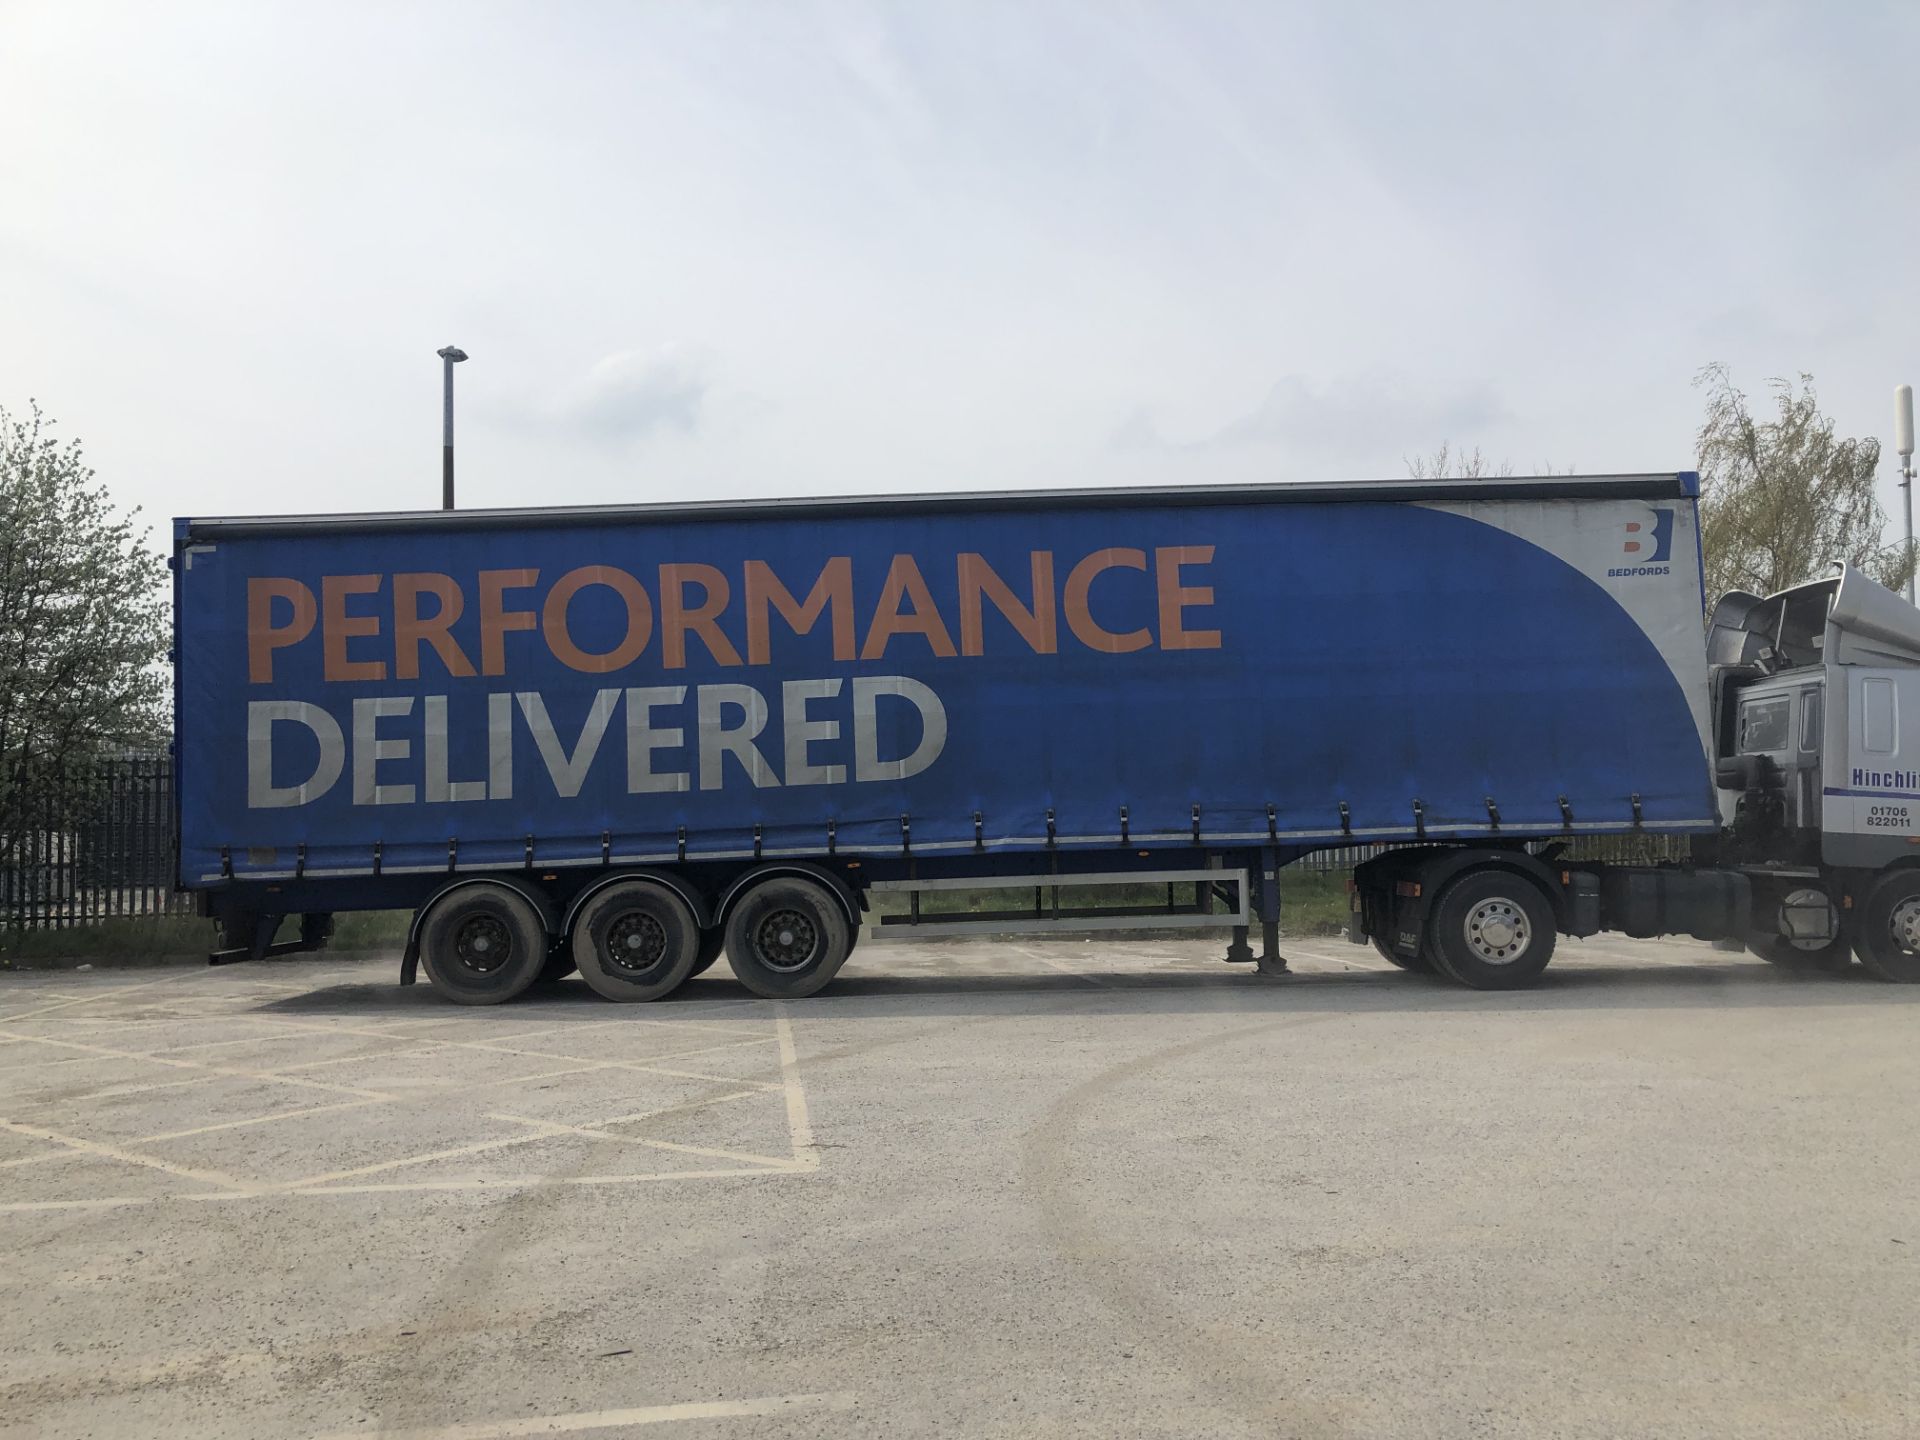 SDC 13.6m Tri-Axle Curtainside Double Deck Semi-Trailer, chassis no. 113829, ID no. C320207, year of